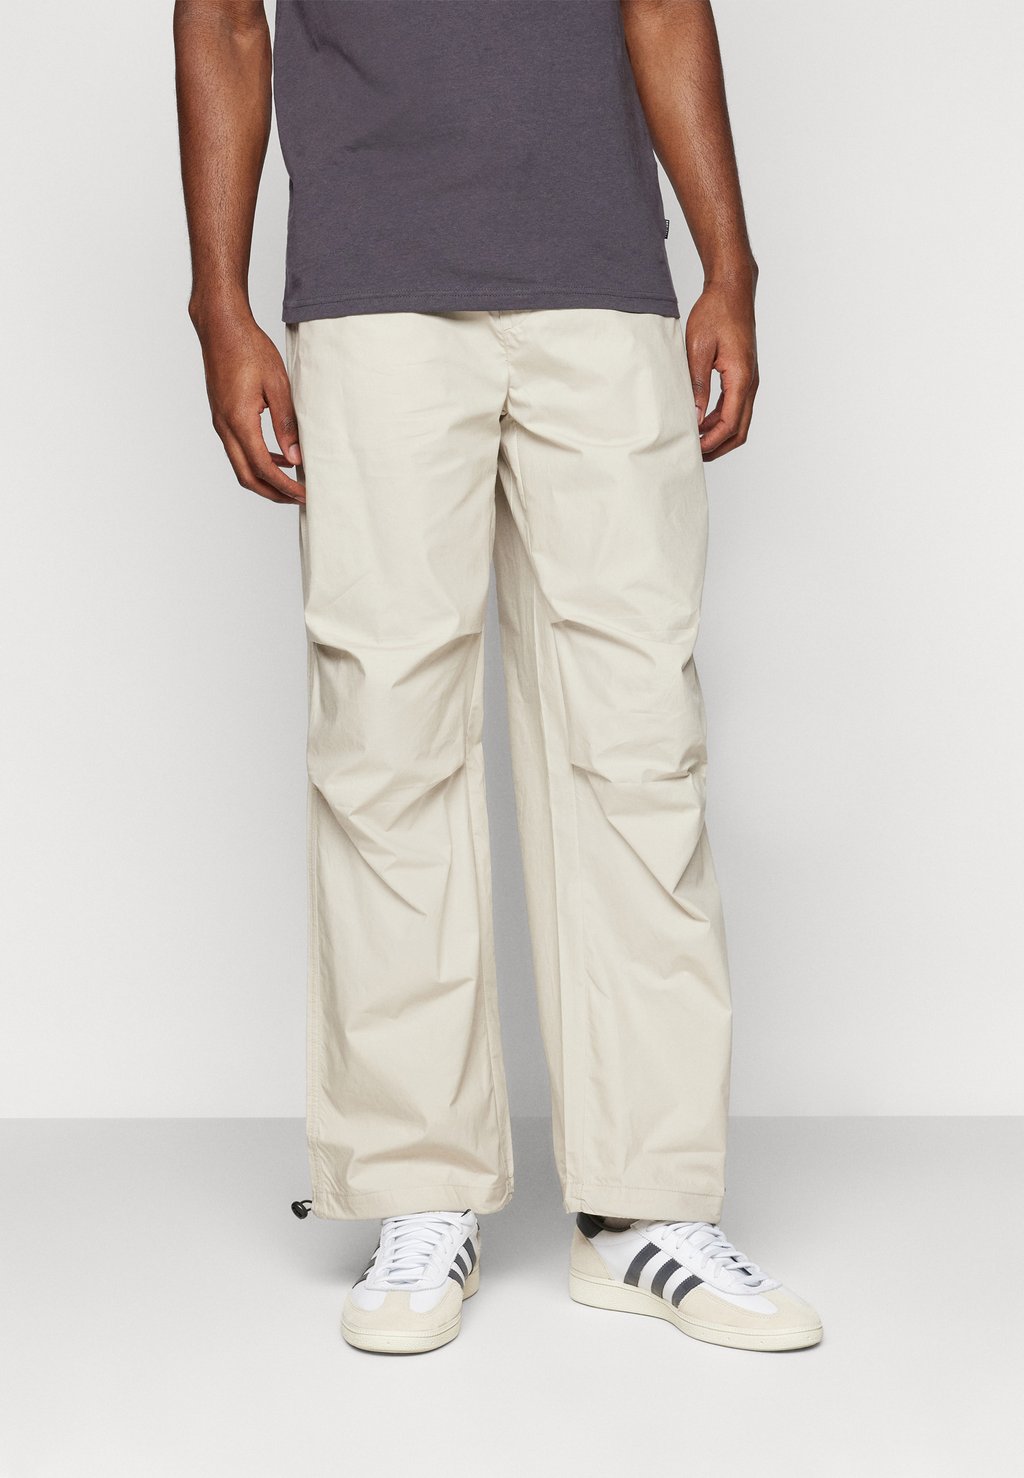 Брюки ONSFRED LOOSE PANT Only & Sons, цвет silver lining брюки карго onsfred loose only